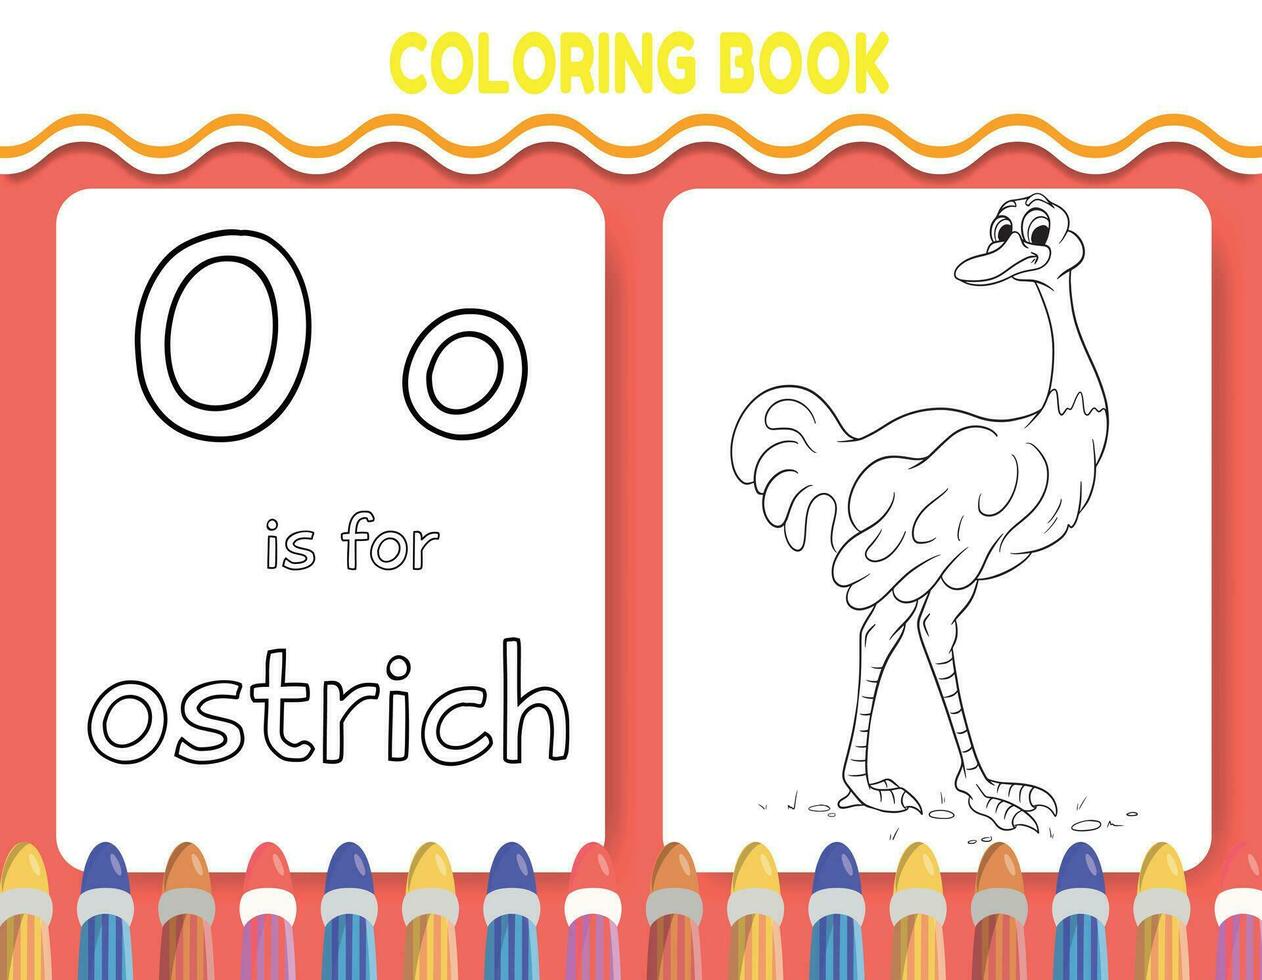 Kids alphabet coloring book page with outlined clipart to color. The letter O is for ostrich. vector